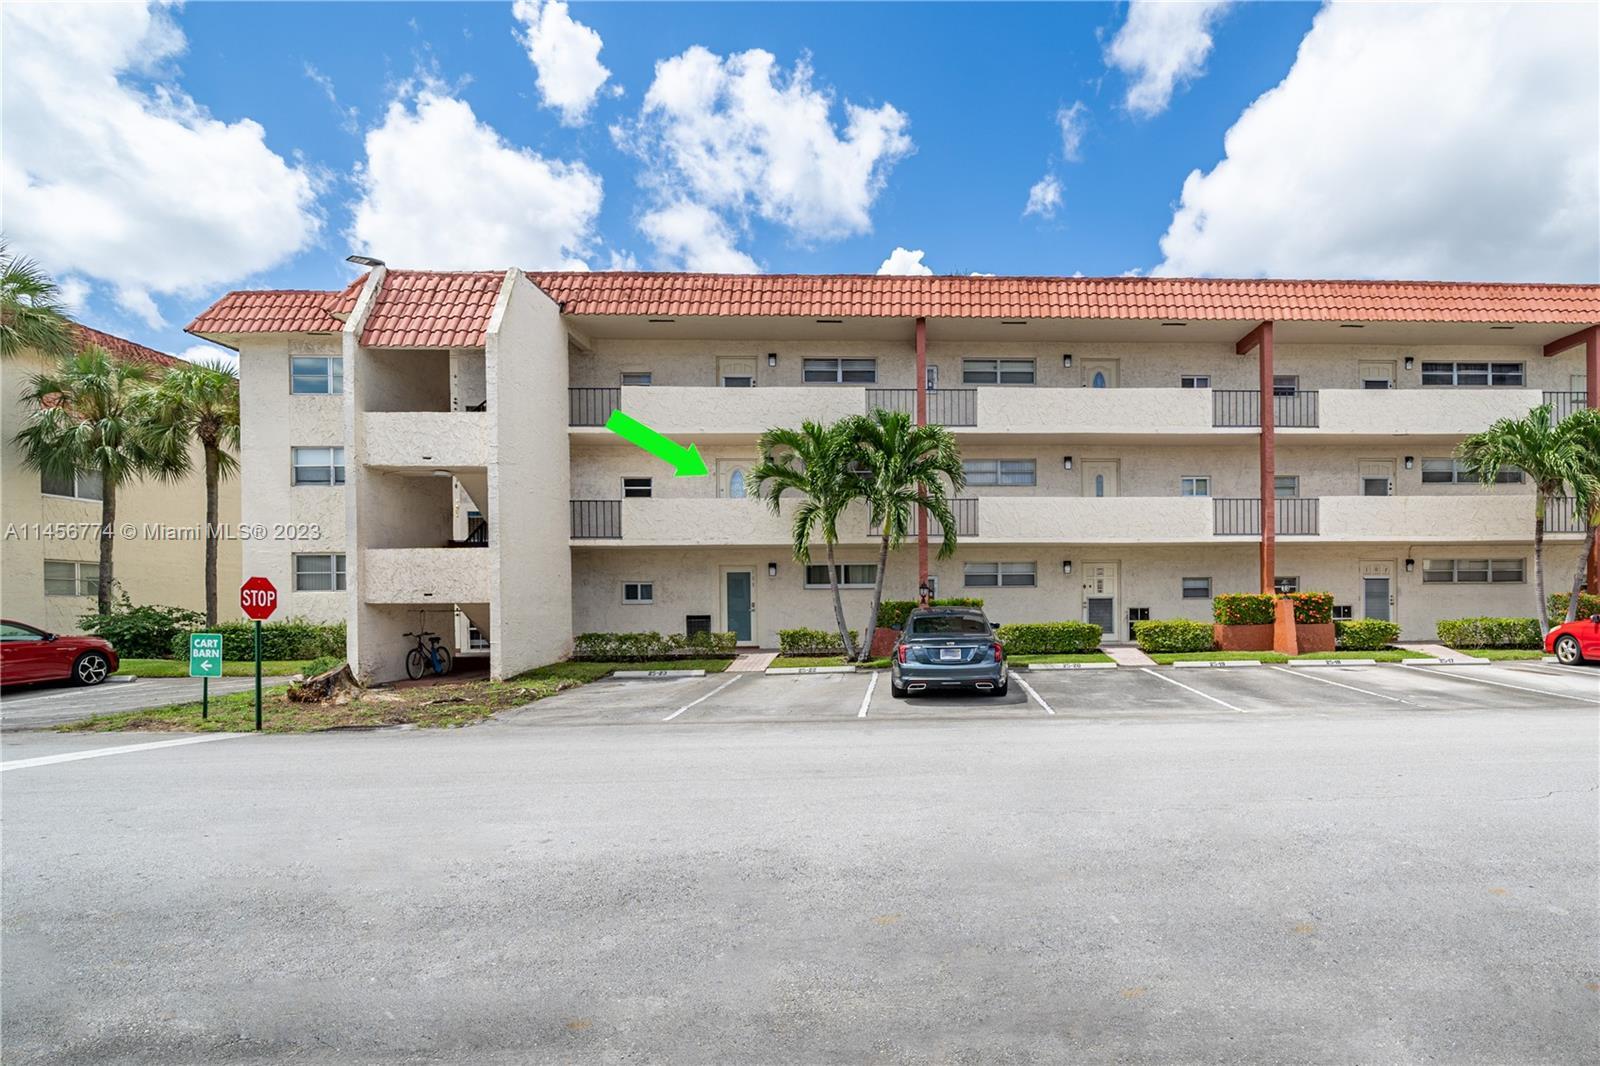 Photo of 711 S Hollybrook Dr #209 in Pembroke Pines, FL